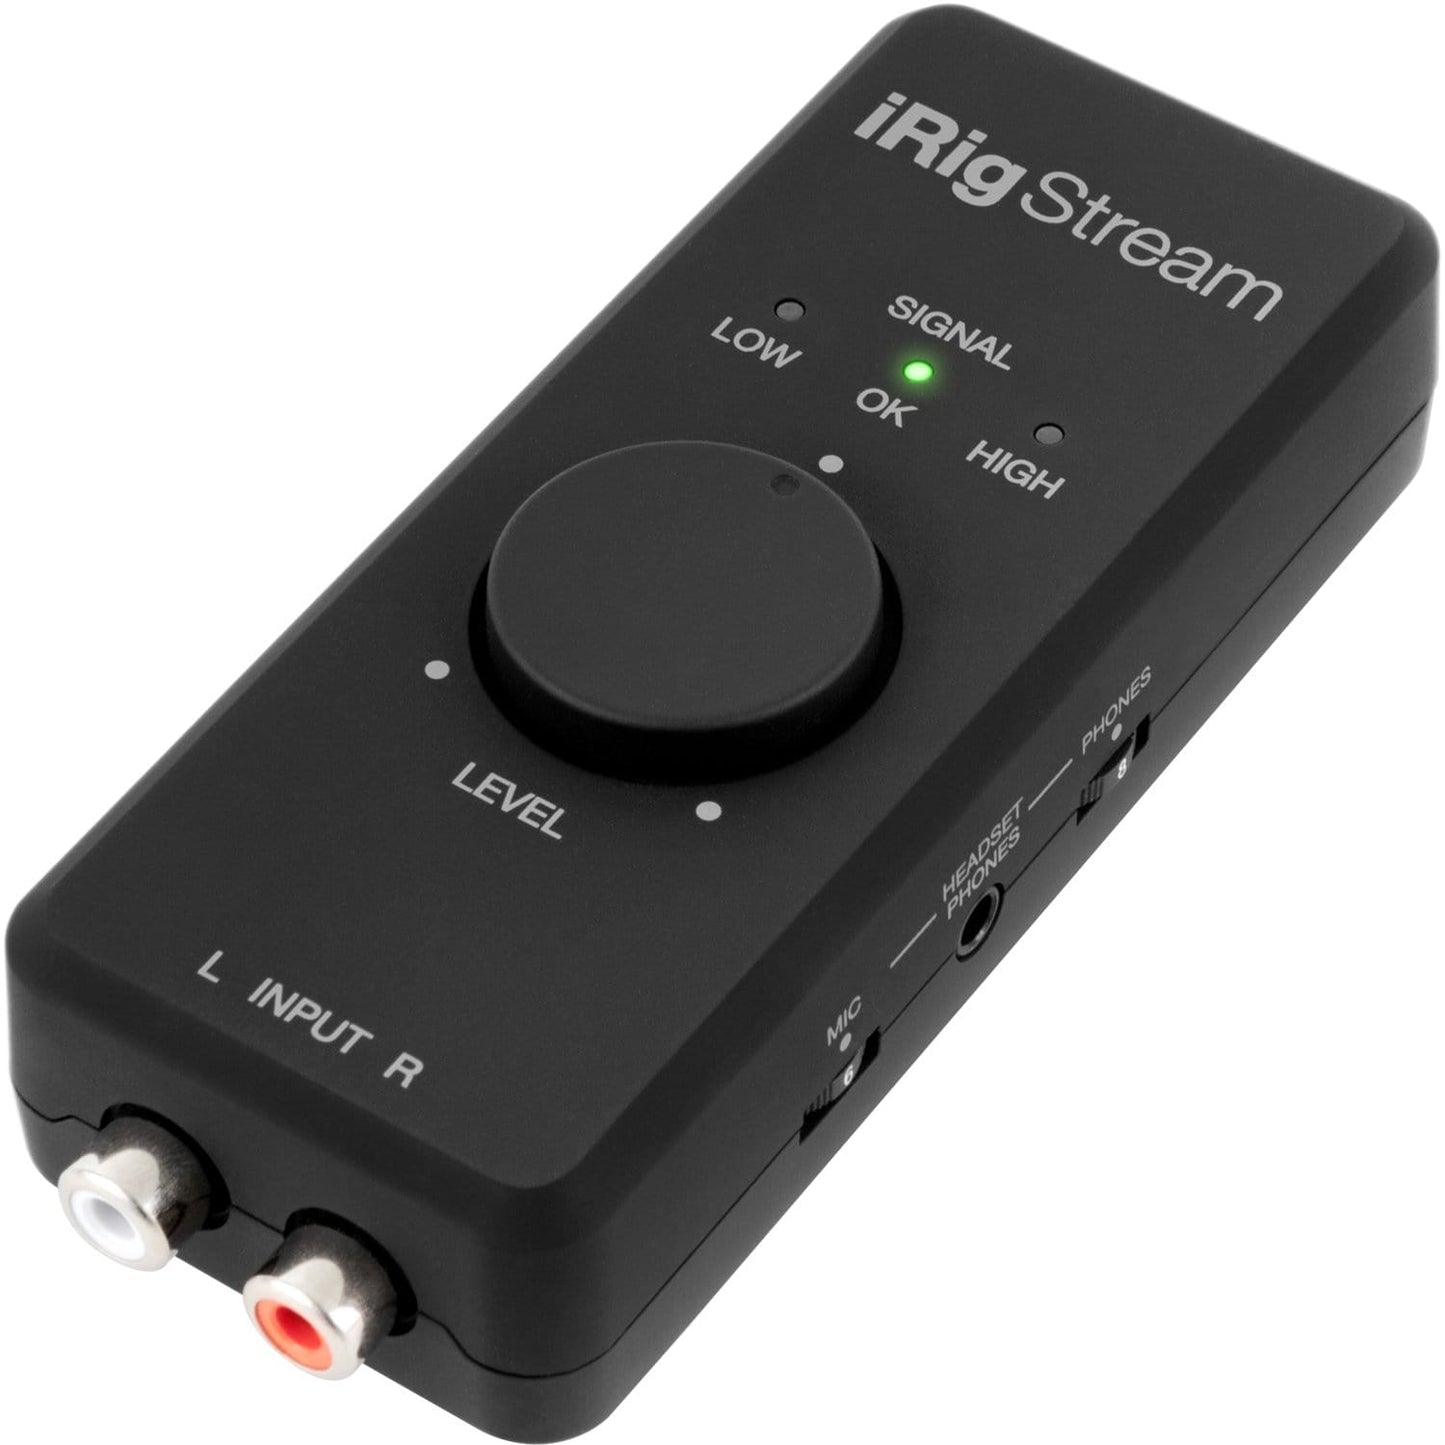 Ik Multimedia Irig Stream Stereo Audio Interface - PSSL ProSound and Stage Lighting